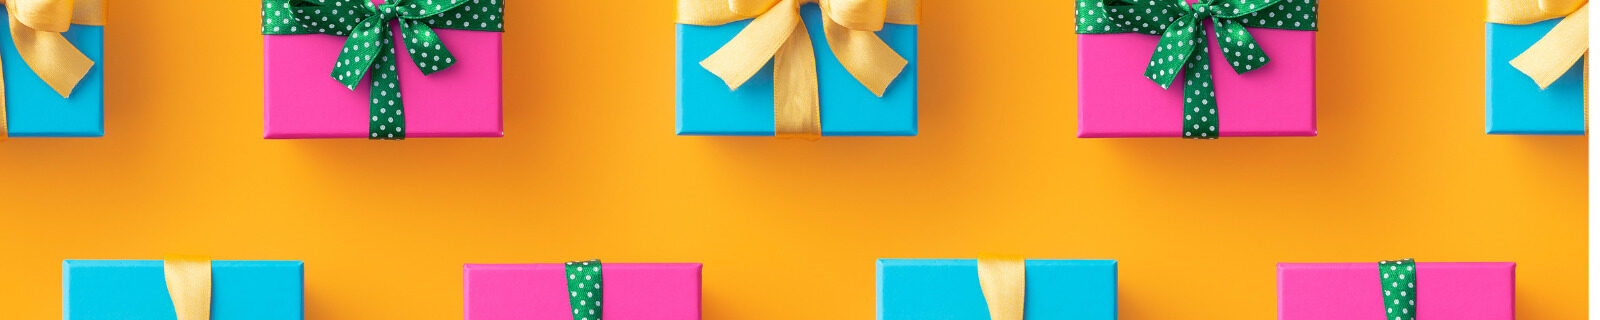 Orange background with brightly colored wrapped gifts in blue and pink